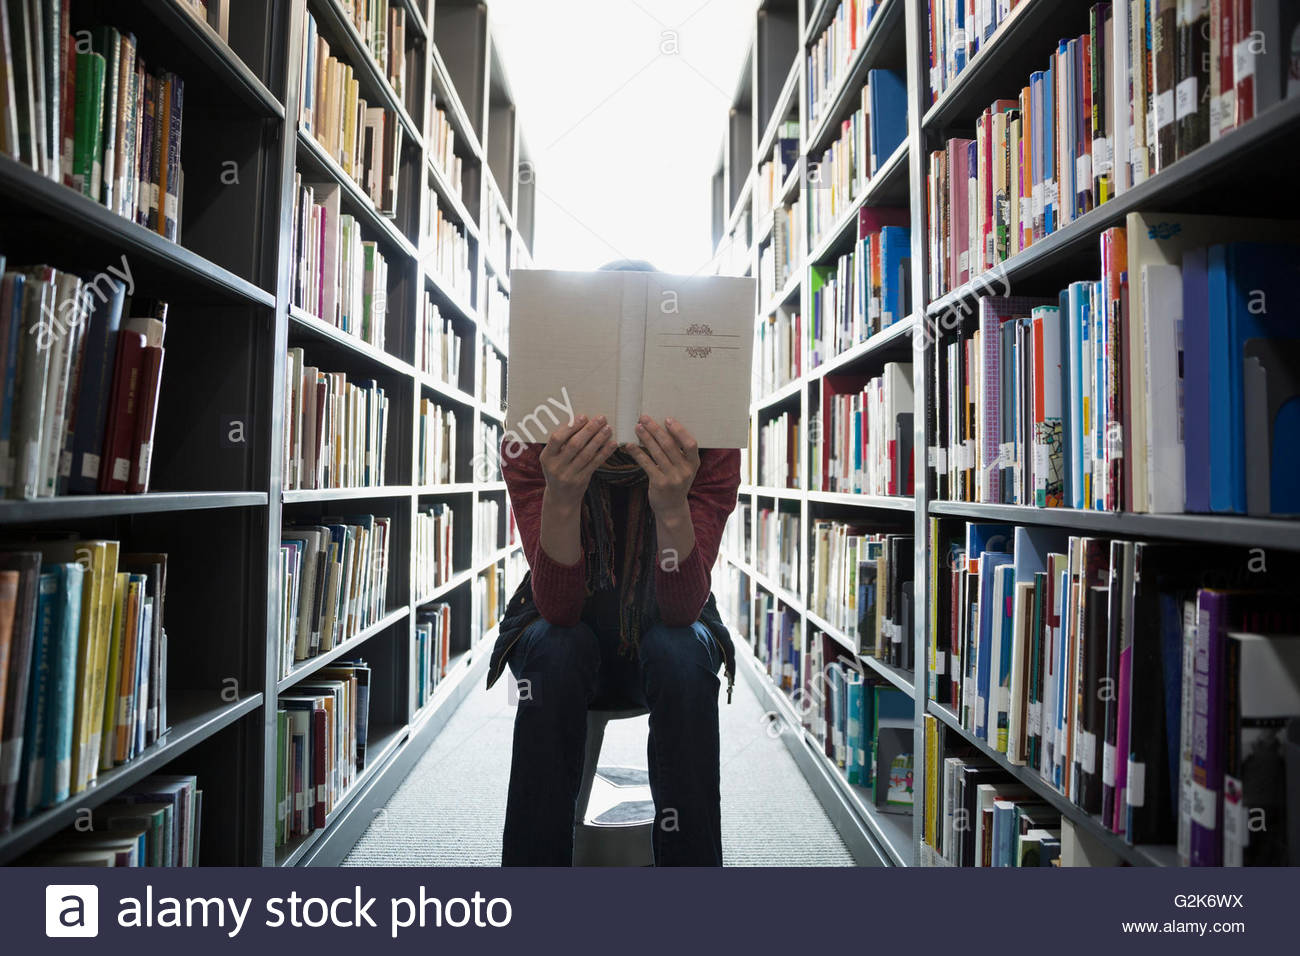 Adult education student reading between library bookshelves Stock Photo